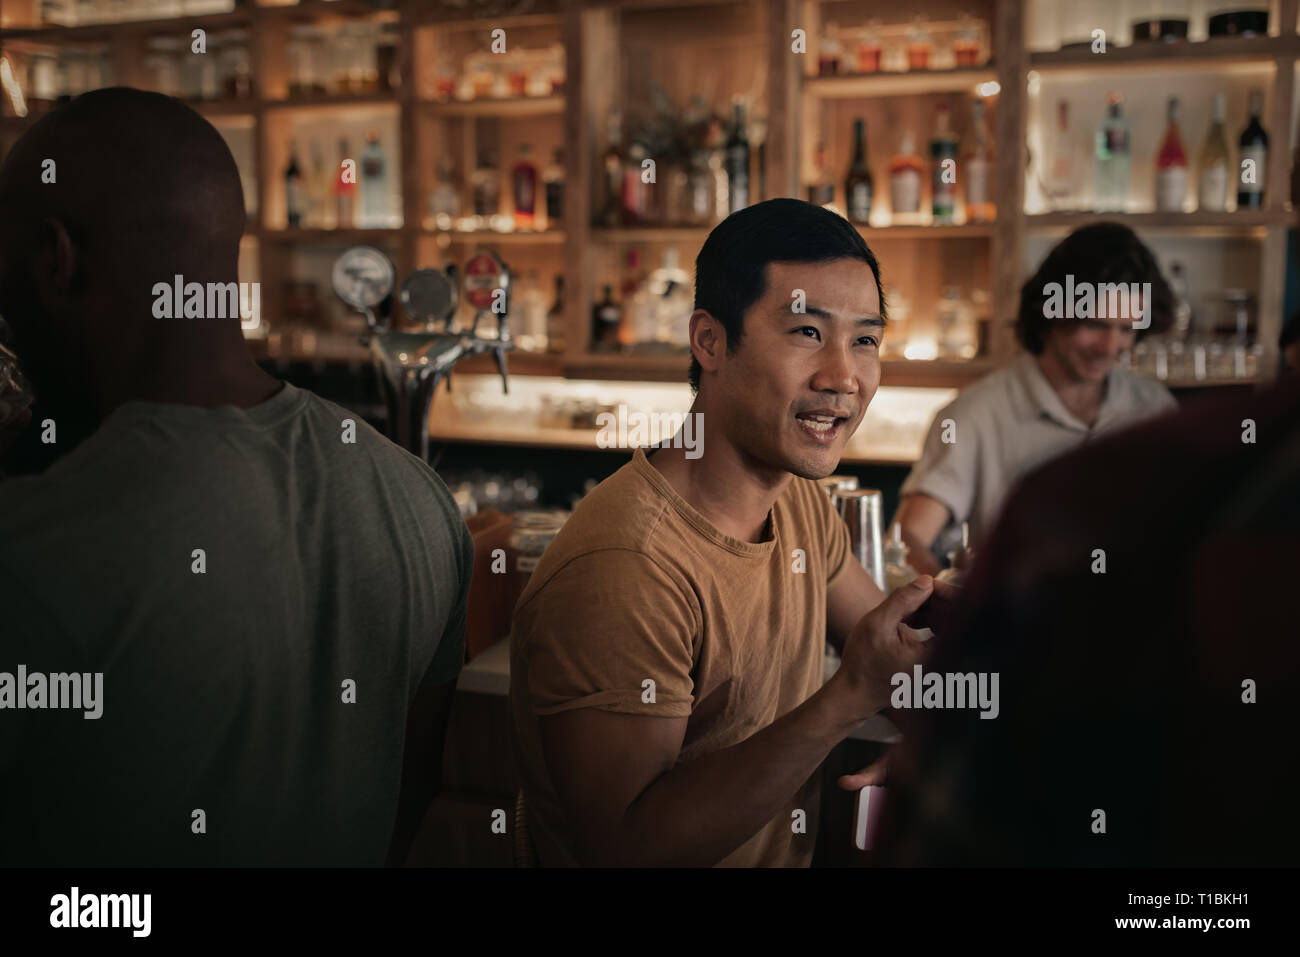 Young man talking with friends in a busy bar Stock Photo